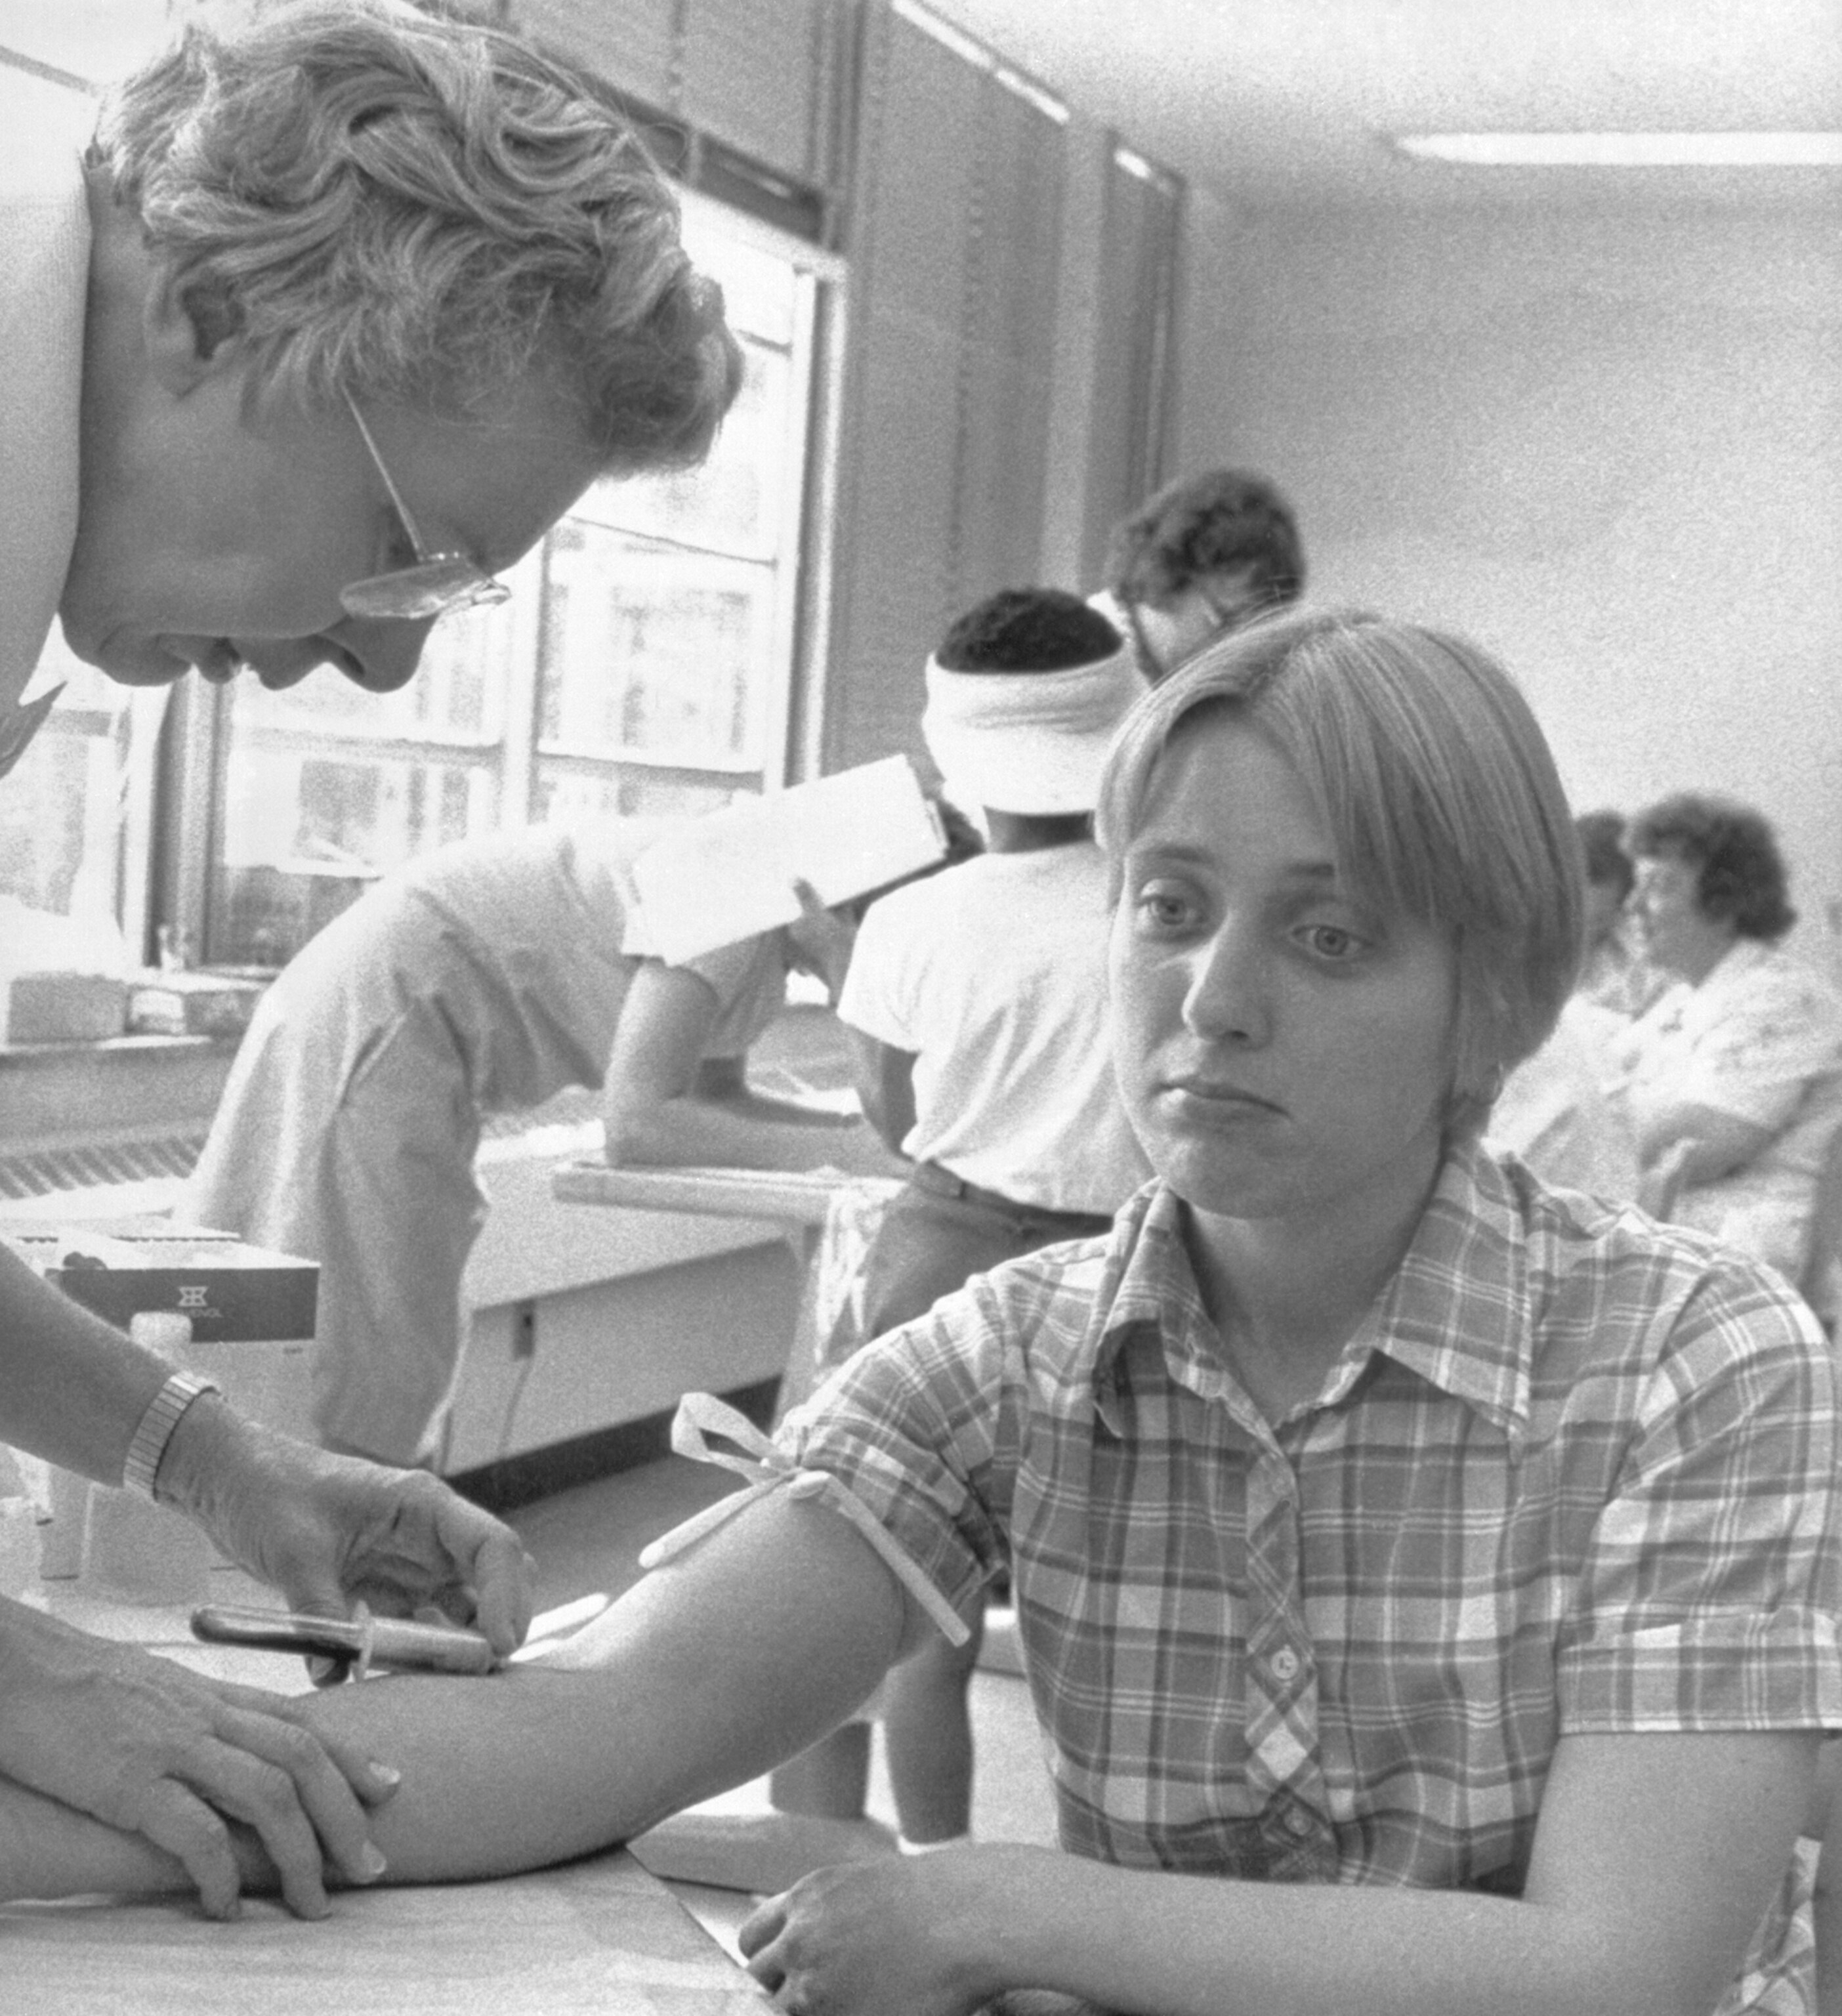 A black and white photograph of a young woman, with a solemn expression a nurse stands above her focused on pulling blood.